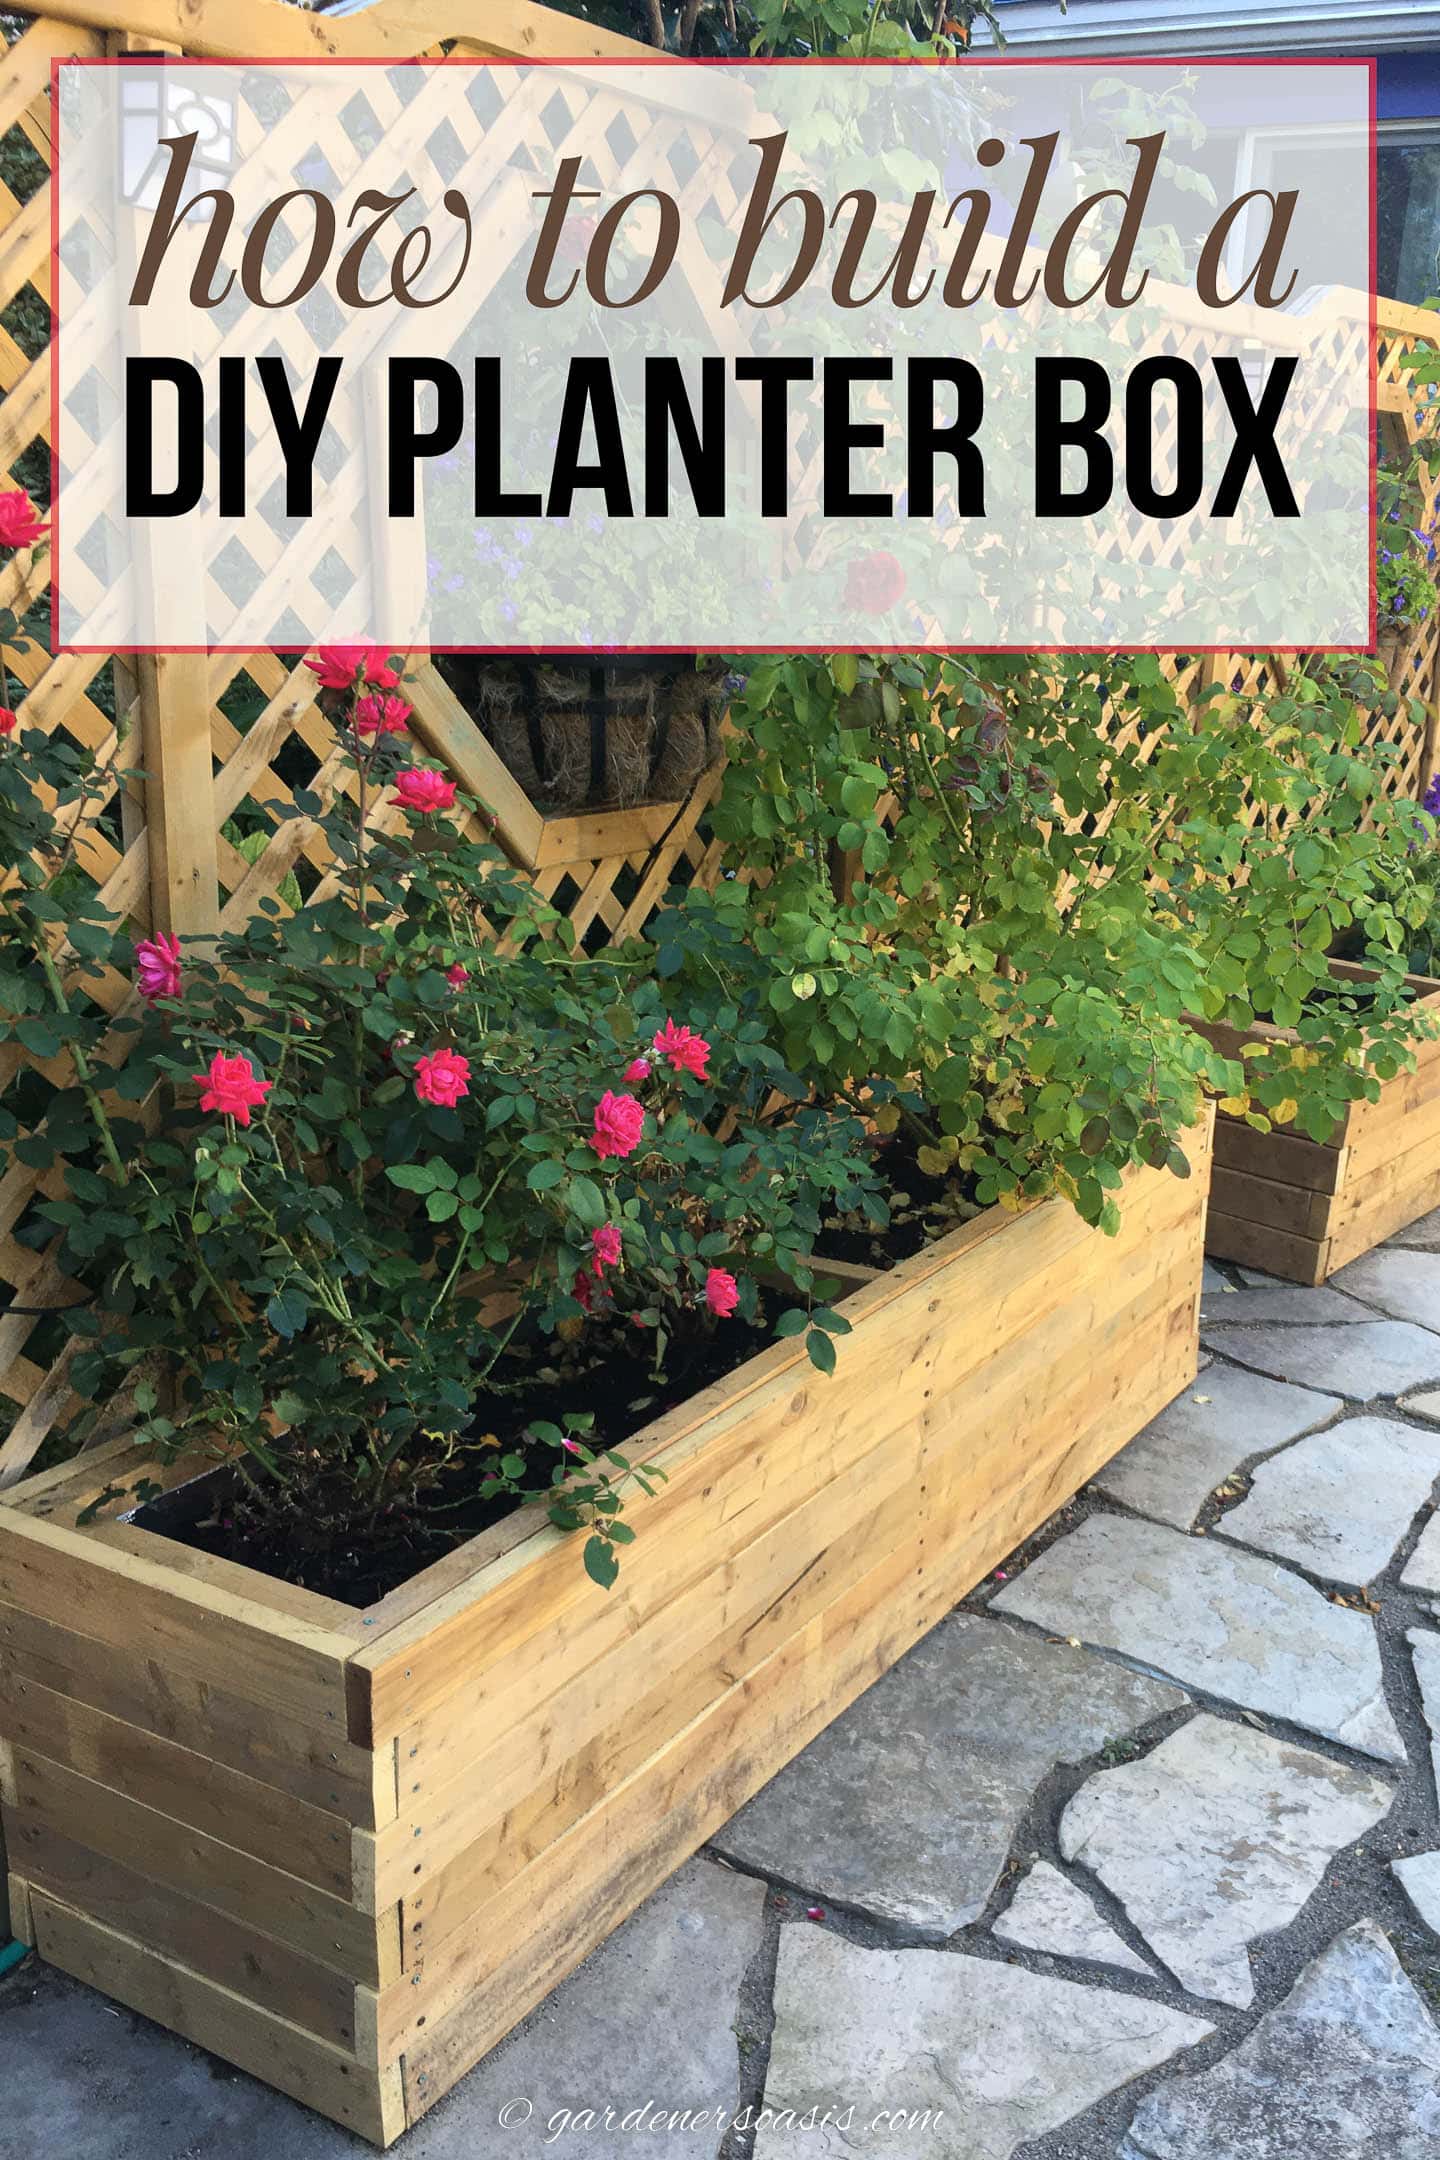 Large DIY planter box filled with roses with the text "How to build a DIY planter box" across the top